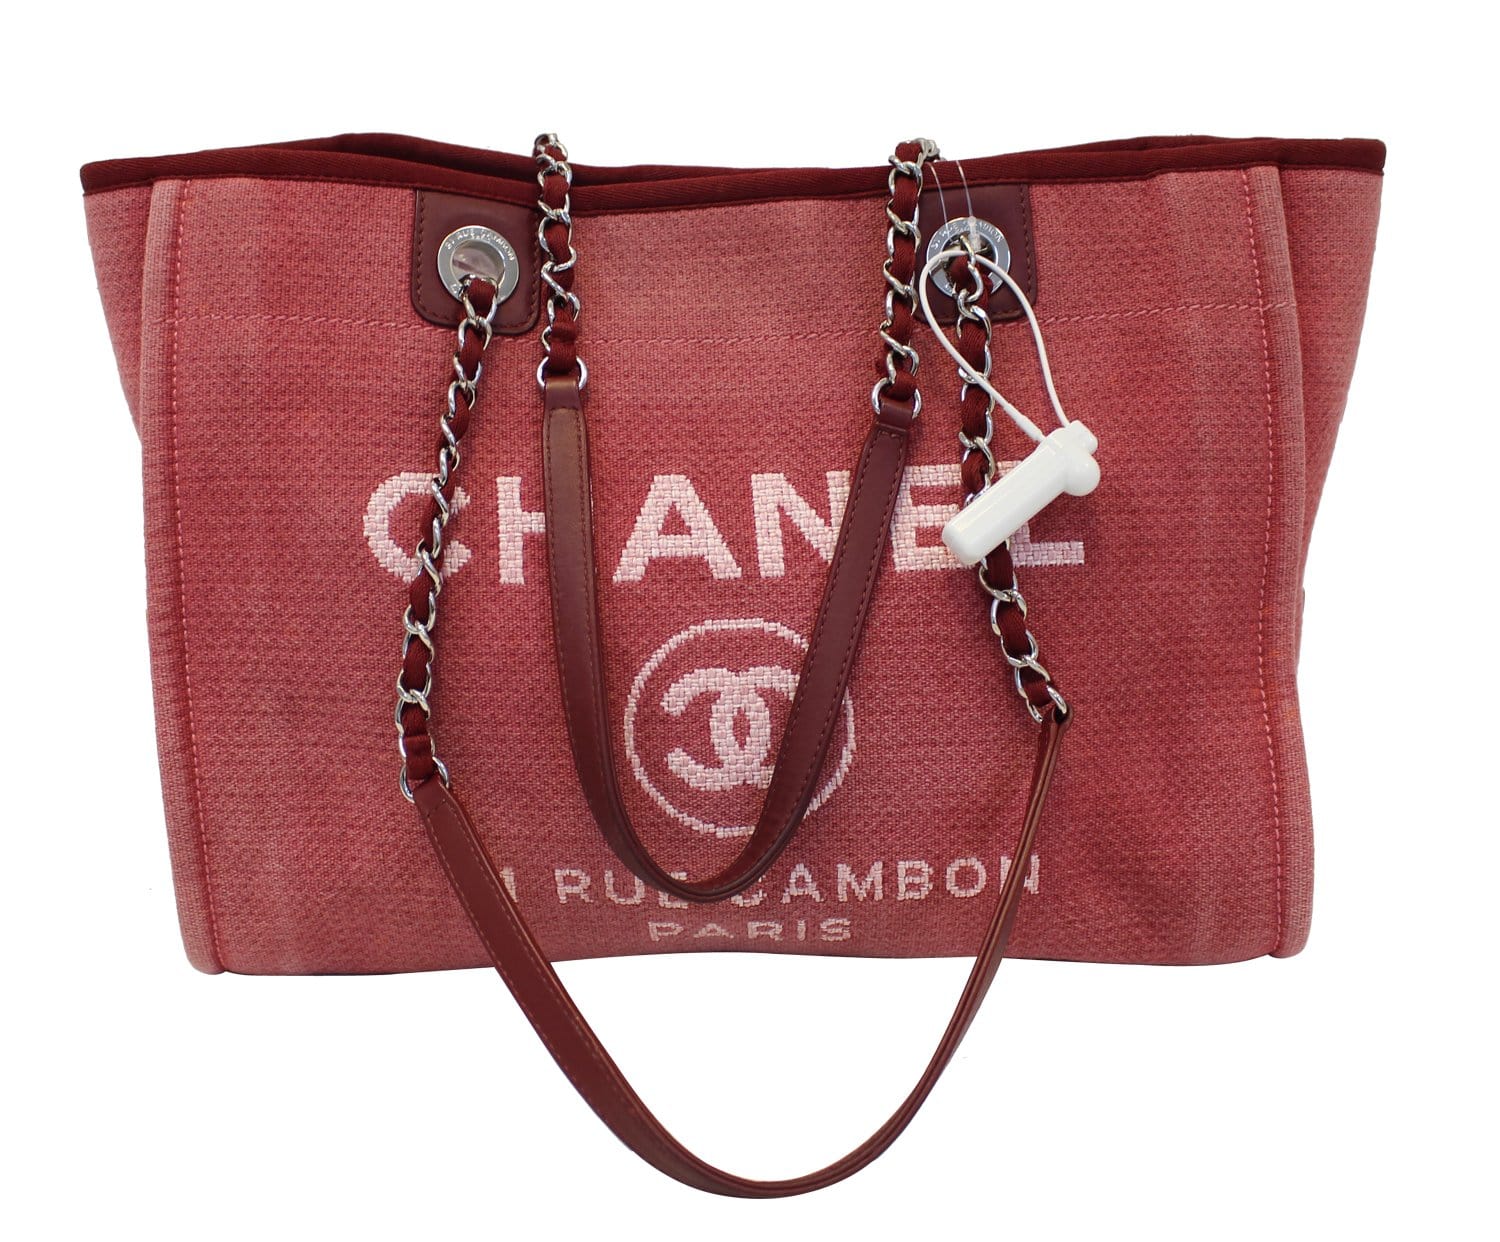 CHANEL Canvas Calfskin Striped Large Deauville Tote Pink Blue